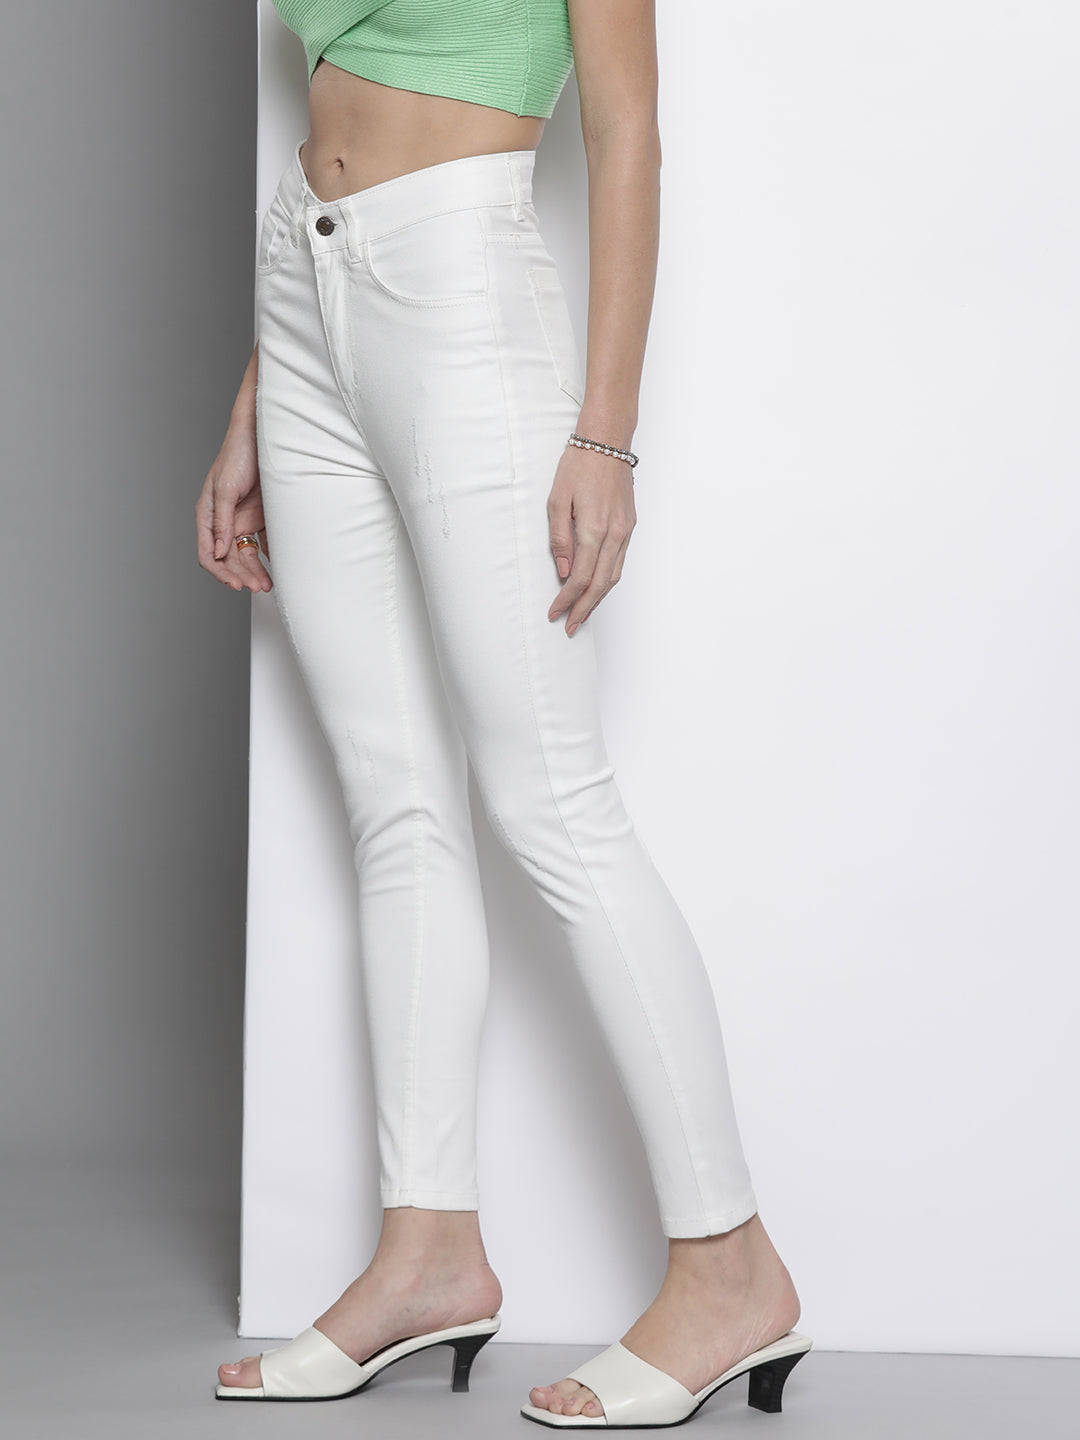 Women White Stretchable Twill Skinny Jeans